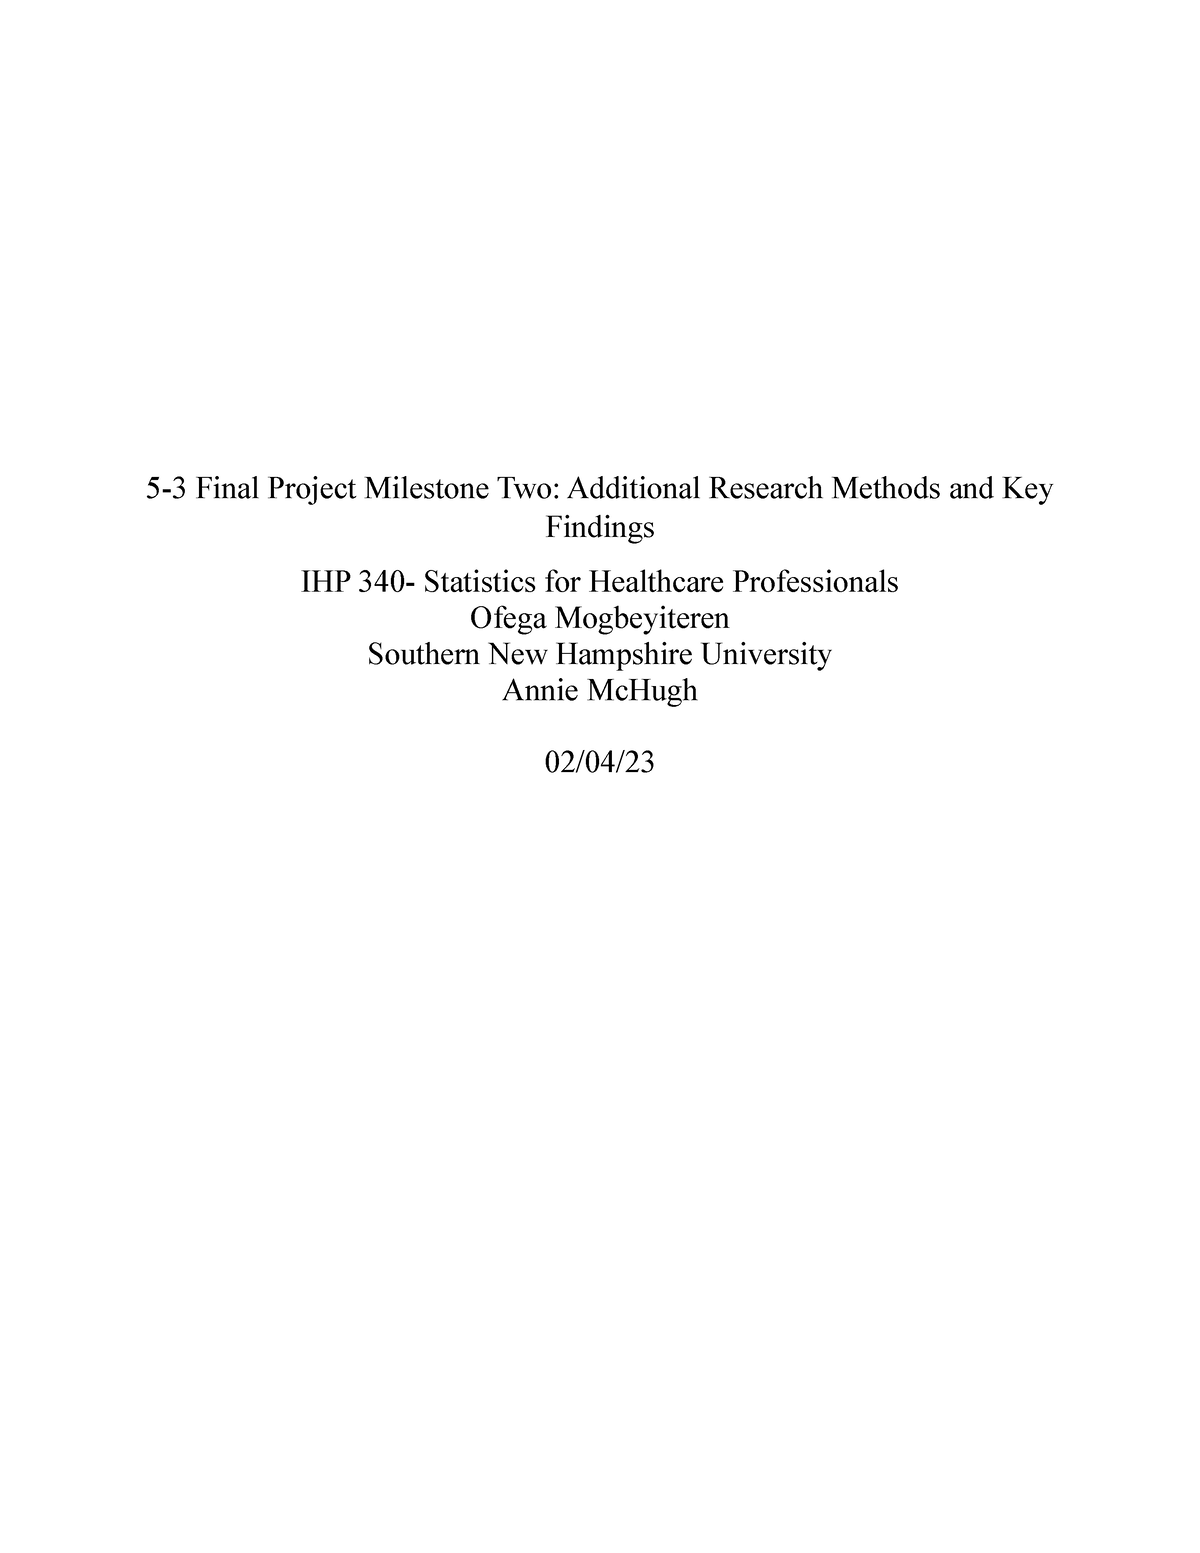 ihp-340-5-3-final-project-milestone-two-additional-research-methods-and-key-findings-5-3